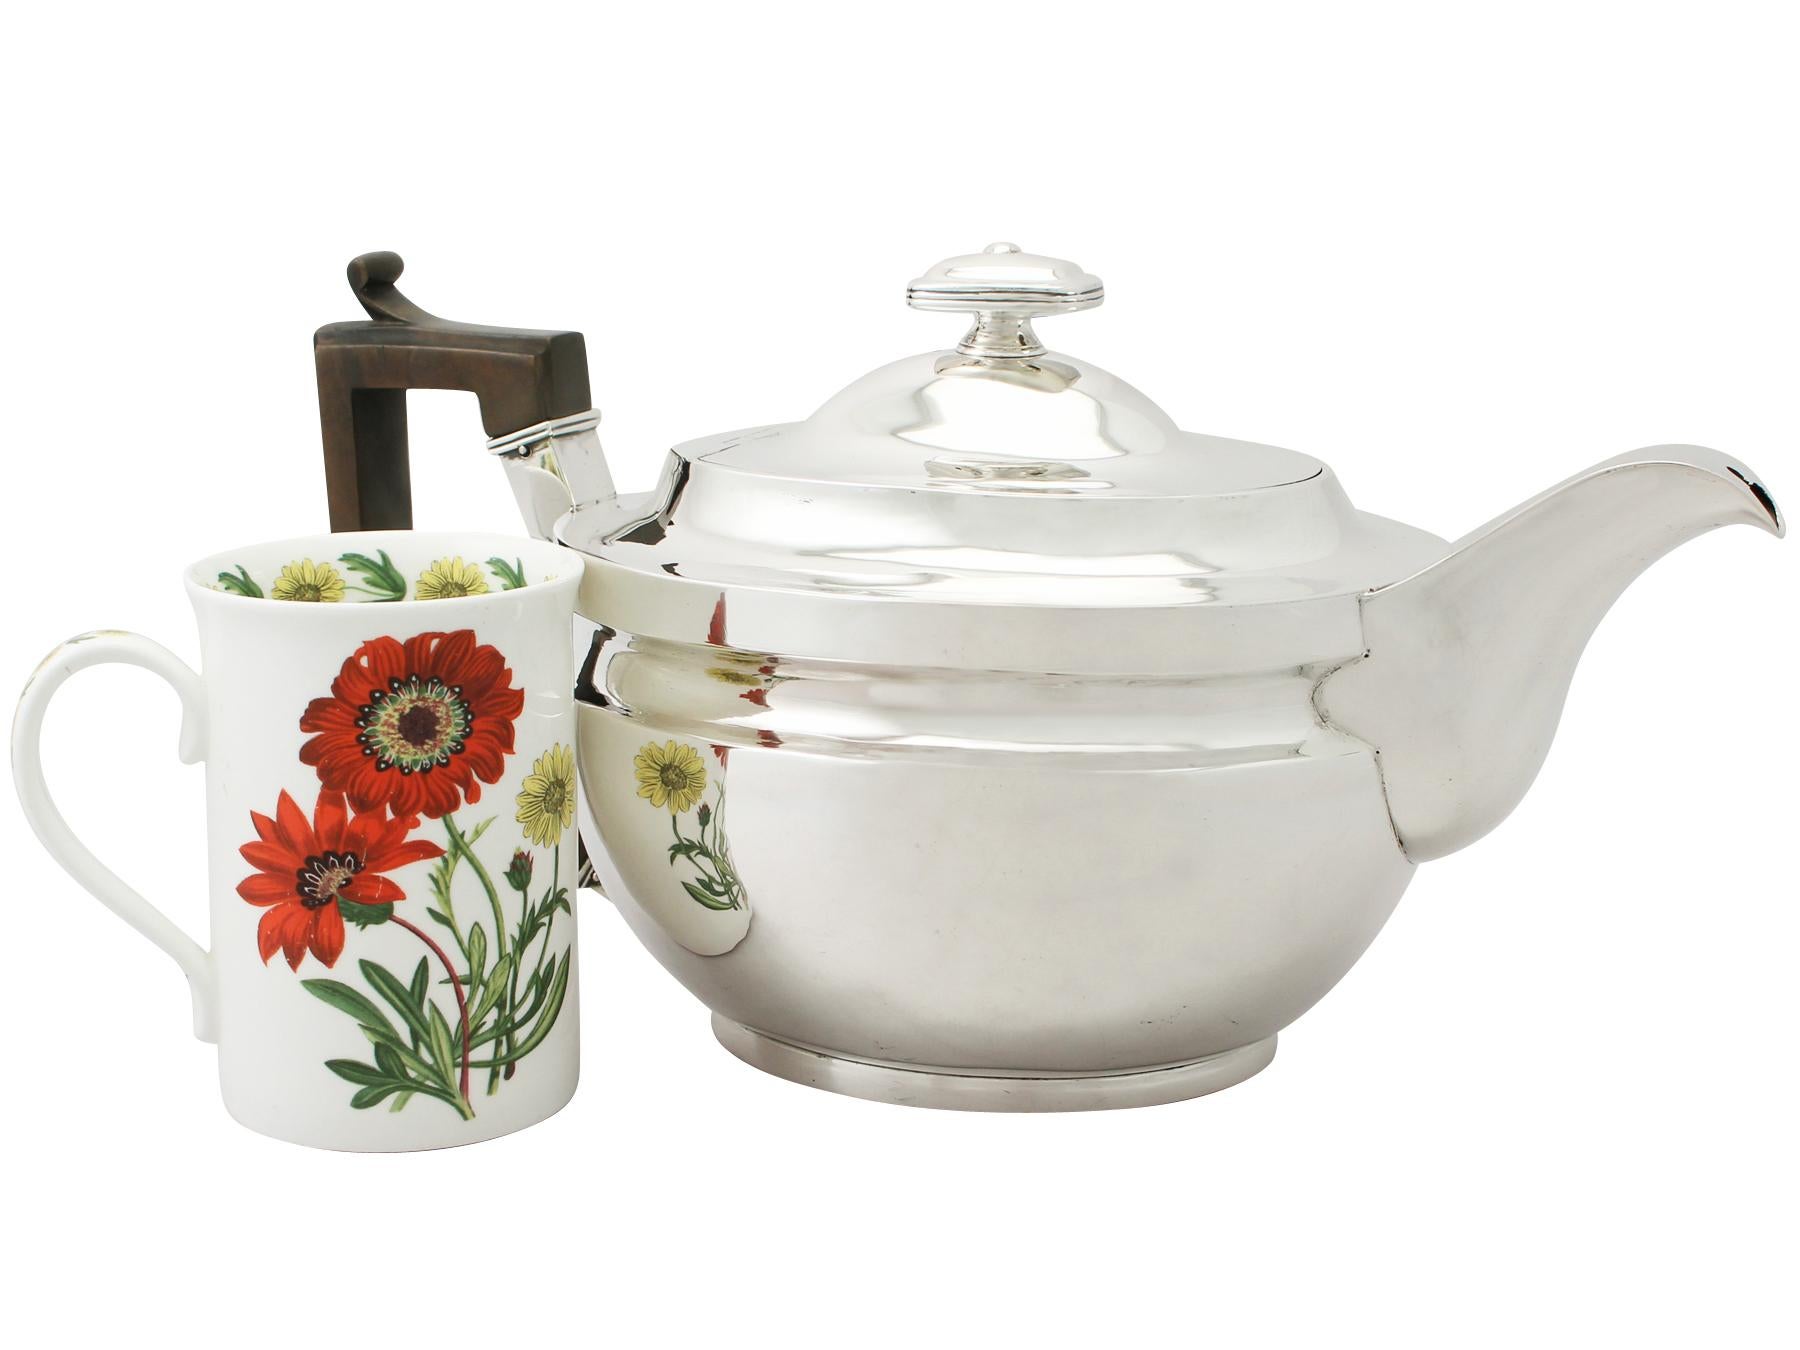 An exceptional, fine and impressive, large antique George III English sterling silver teapot; an addition to our Georgian silver teaware collection.

This exceptional antique George III sterling silver teapot has a plain oval rounded form onto a